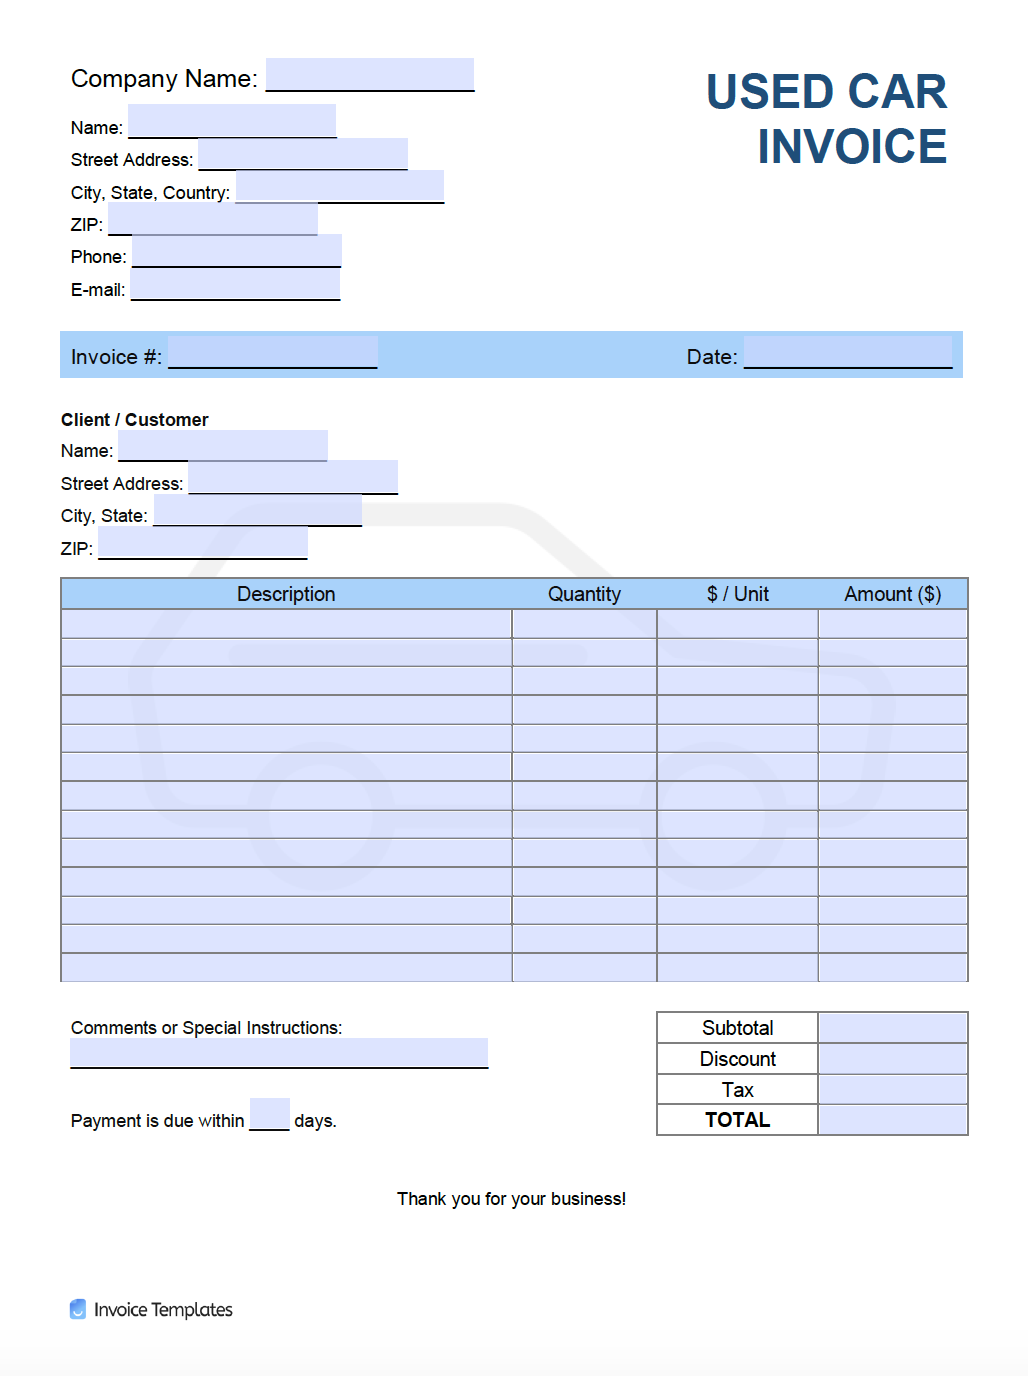 Free Used Car Invoice Template Pdf Word Excel